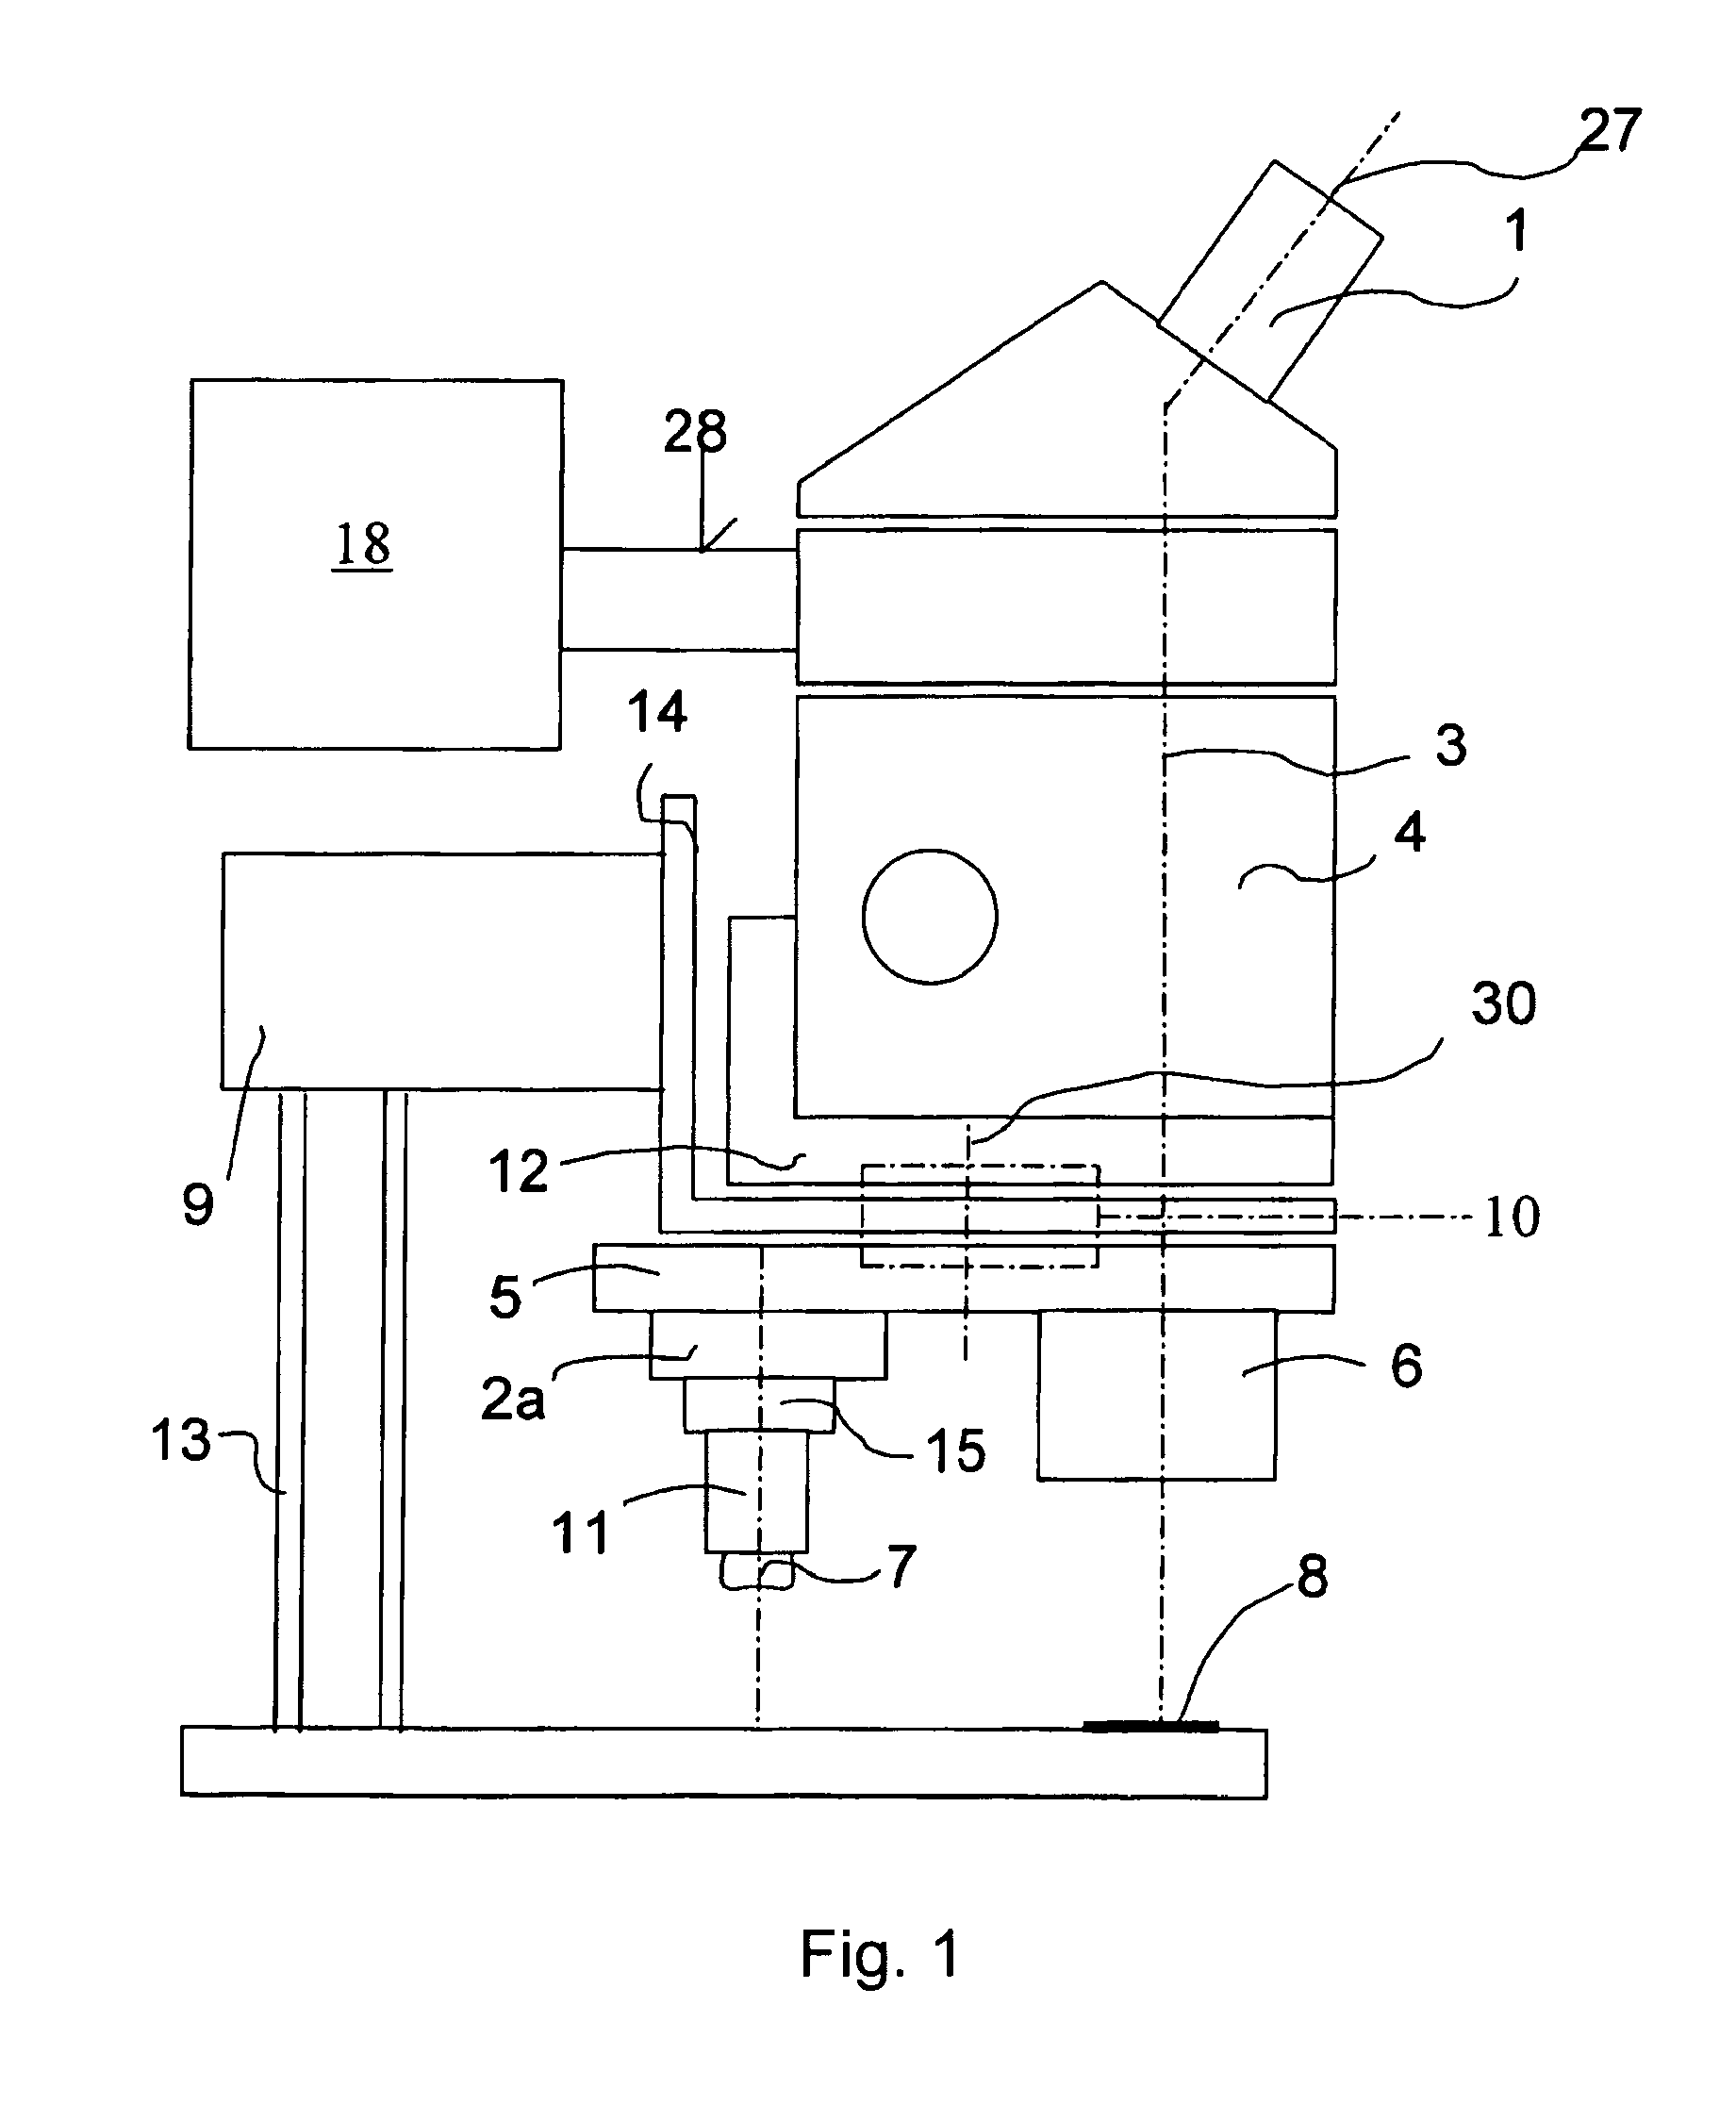 Stereomicroscope or additional element for a stereomicroscope